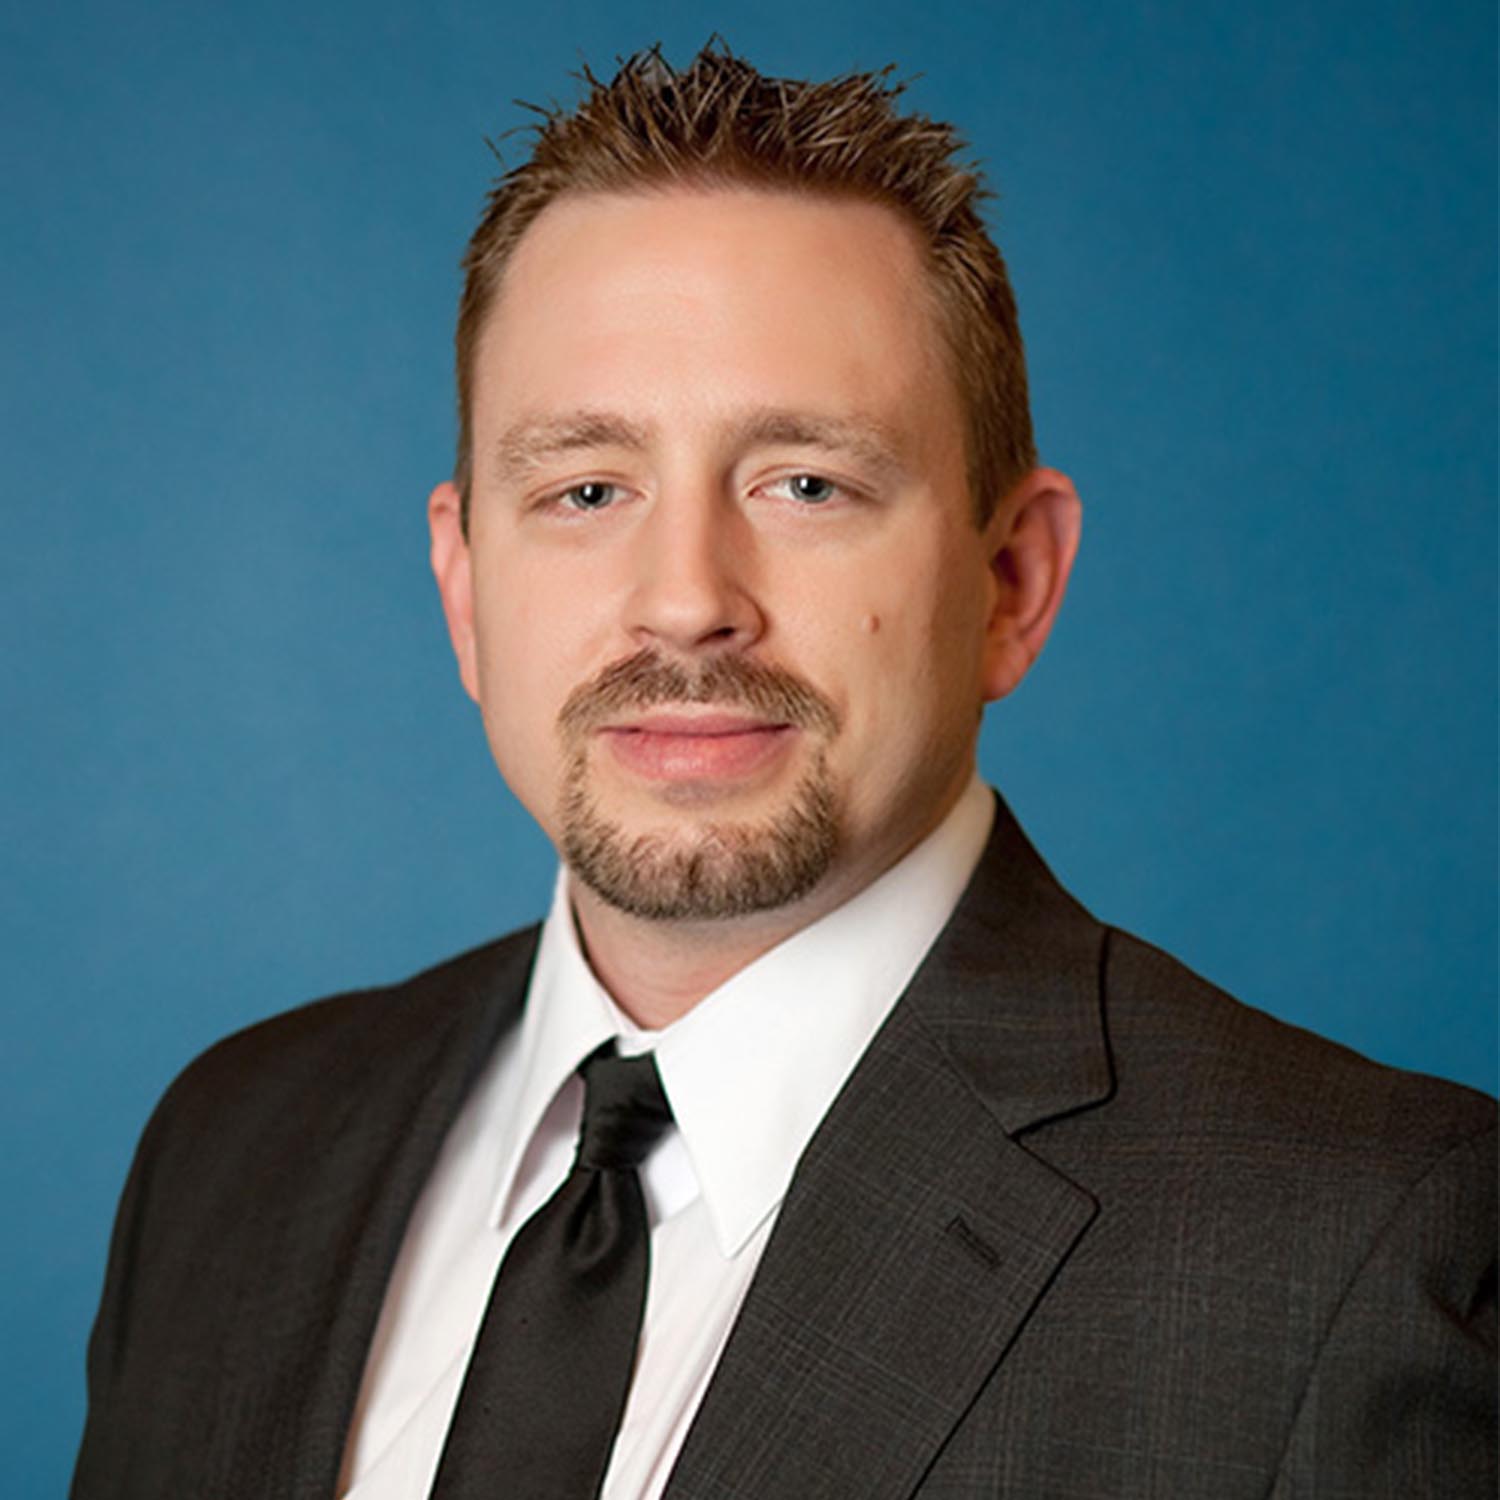 Photo of Shawn Wilson, Chief Technology Officer for Union State Bank.